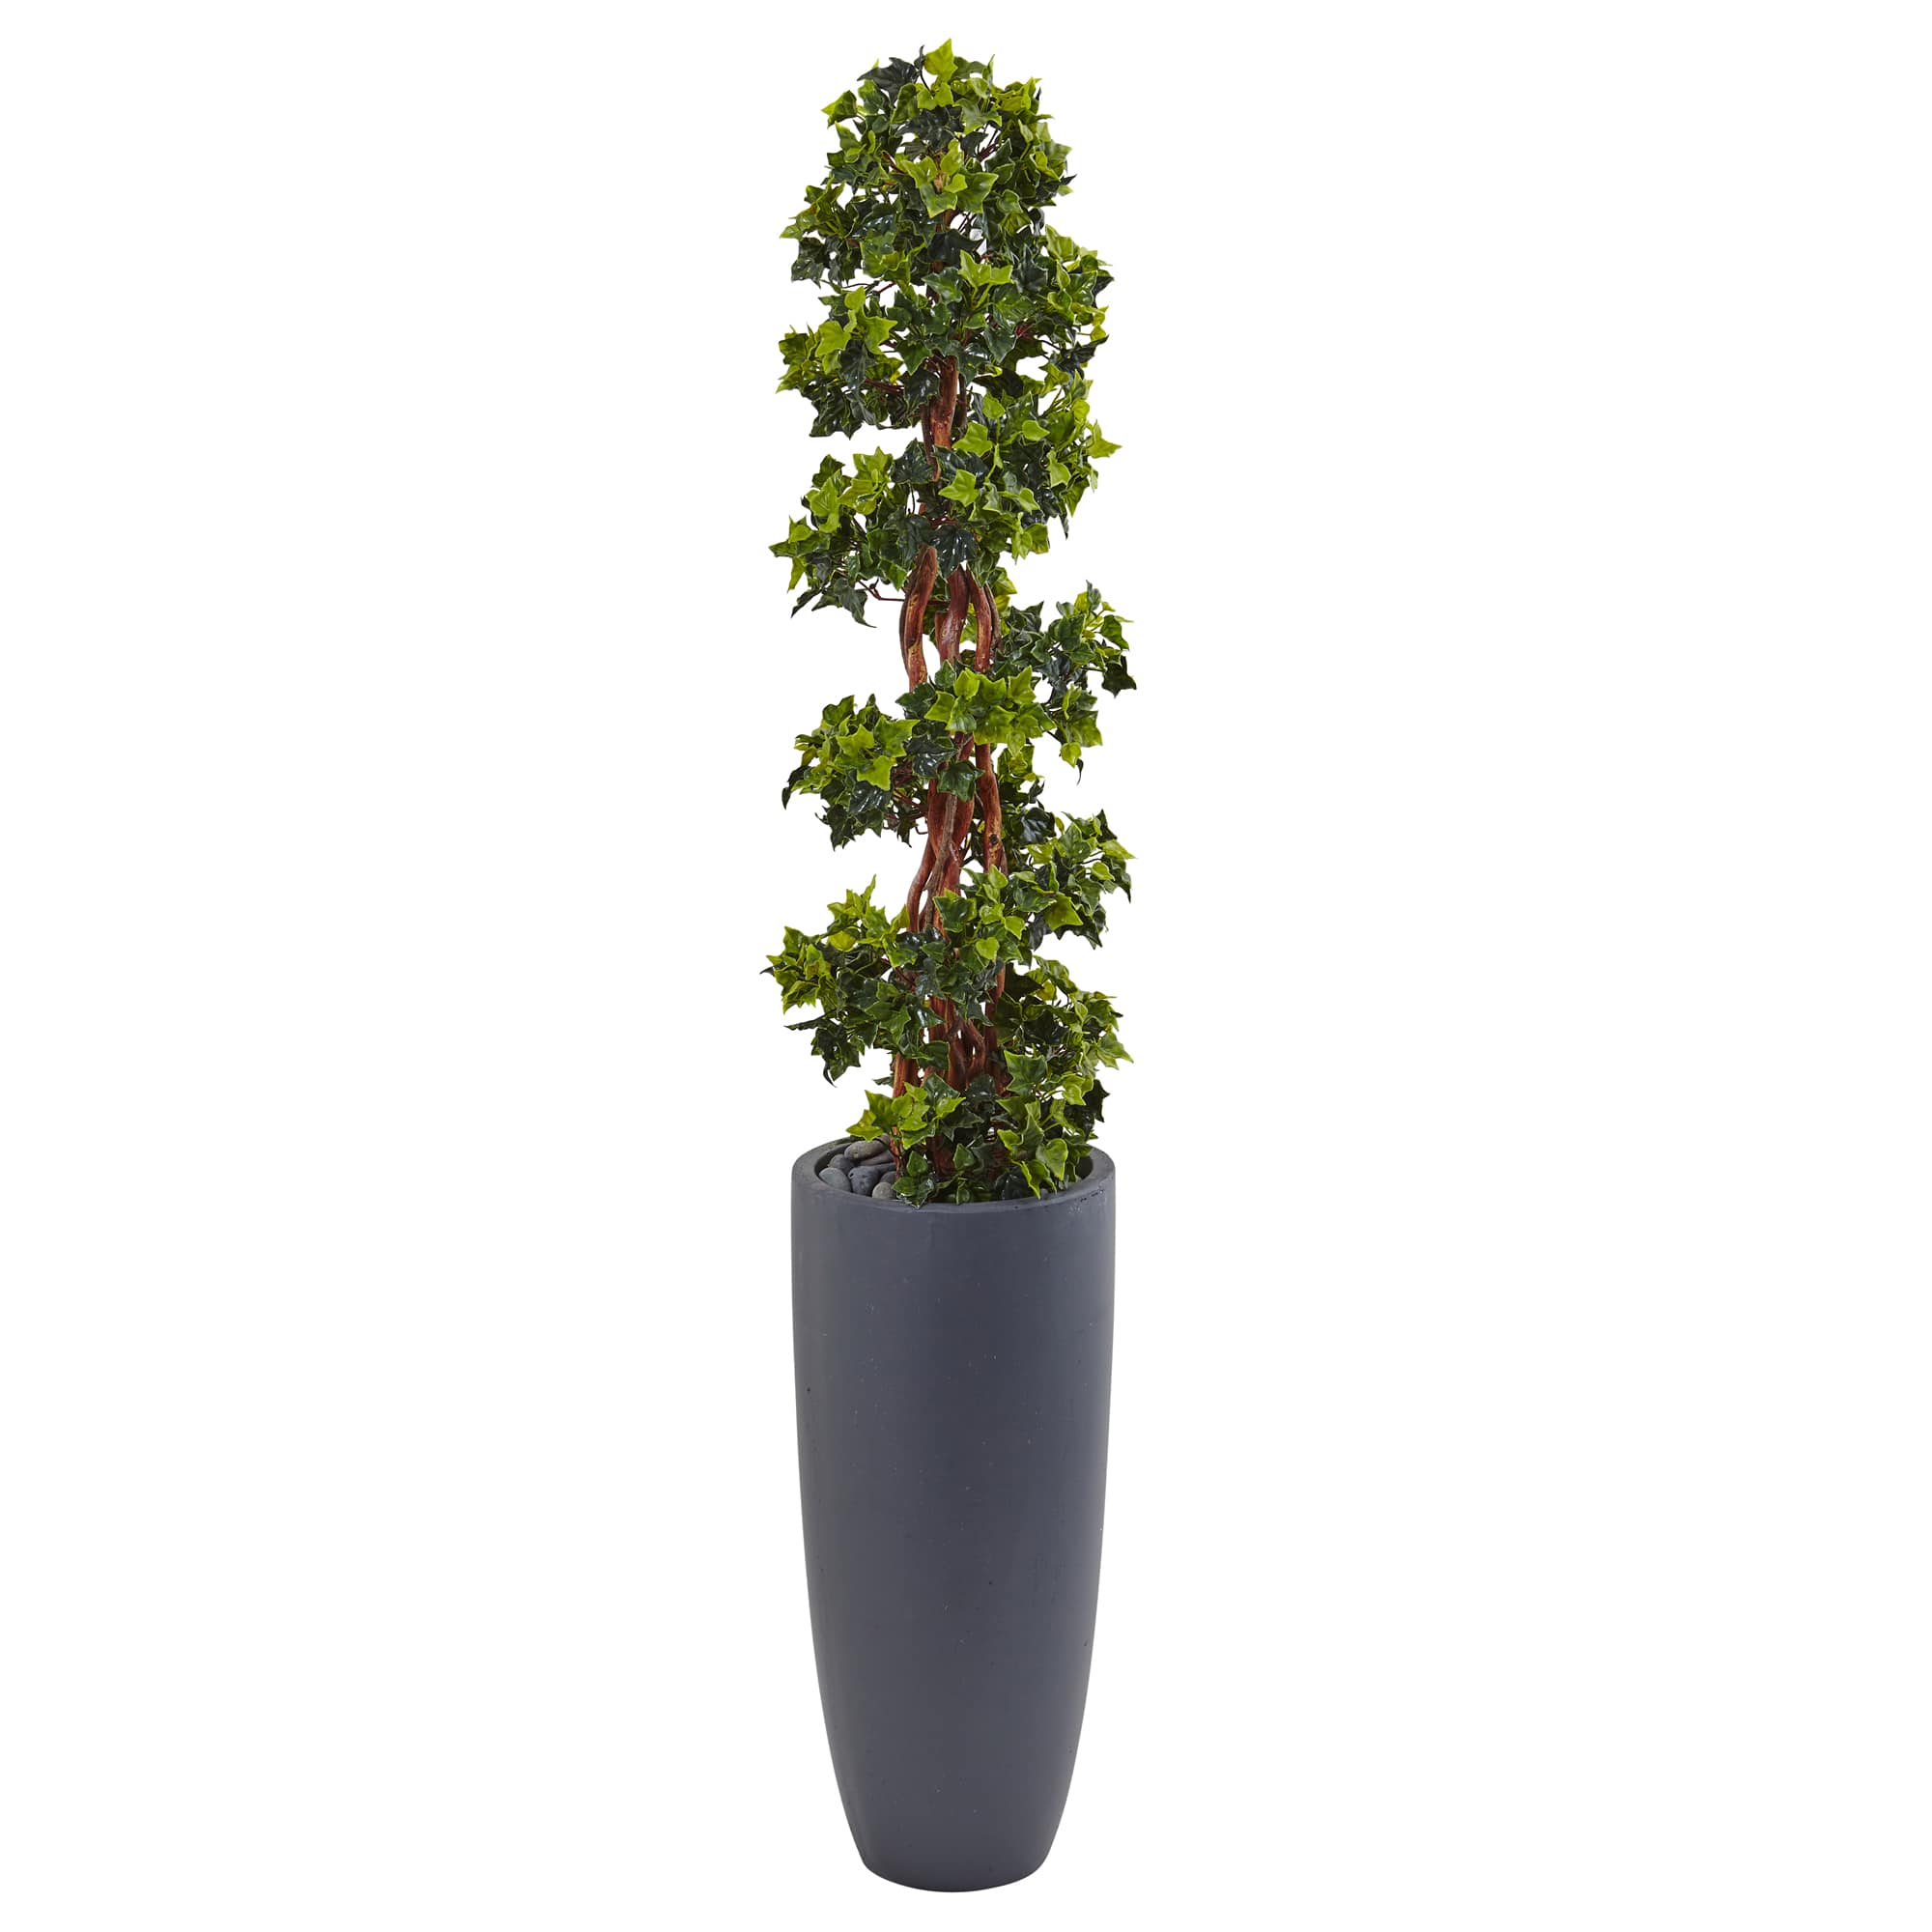 5ft. English Ivy Spiral Topiary Tree in Gray Planter